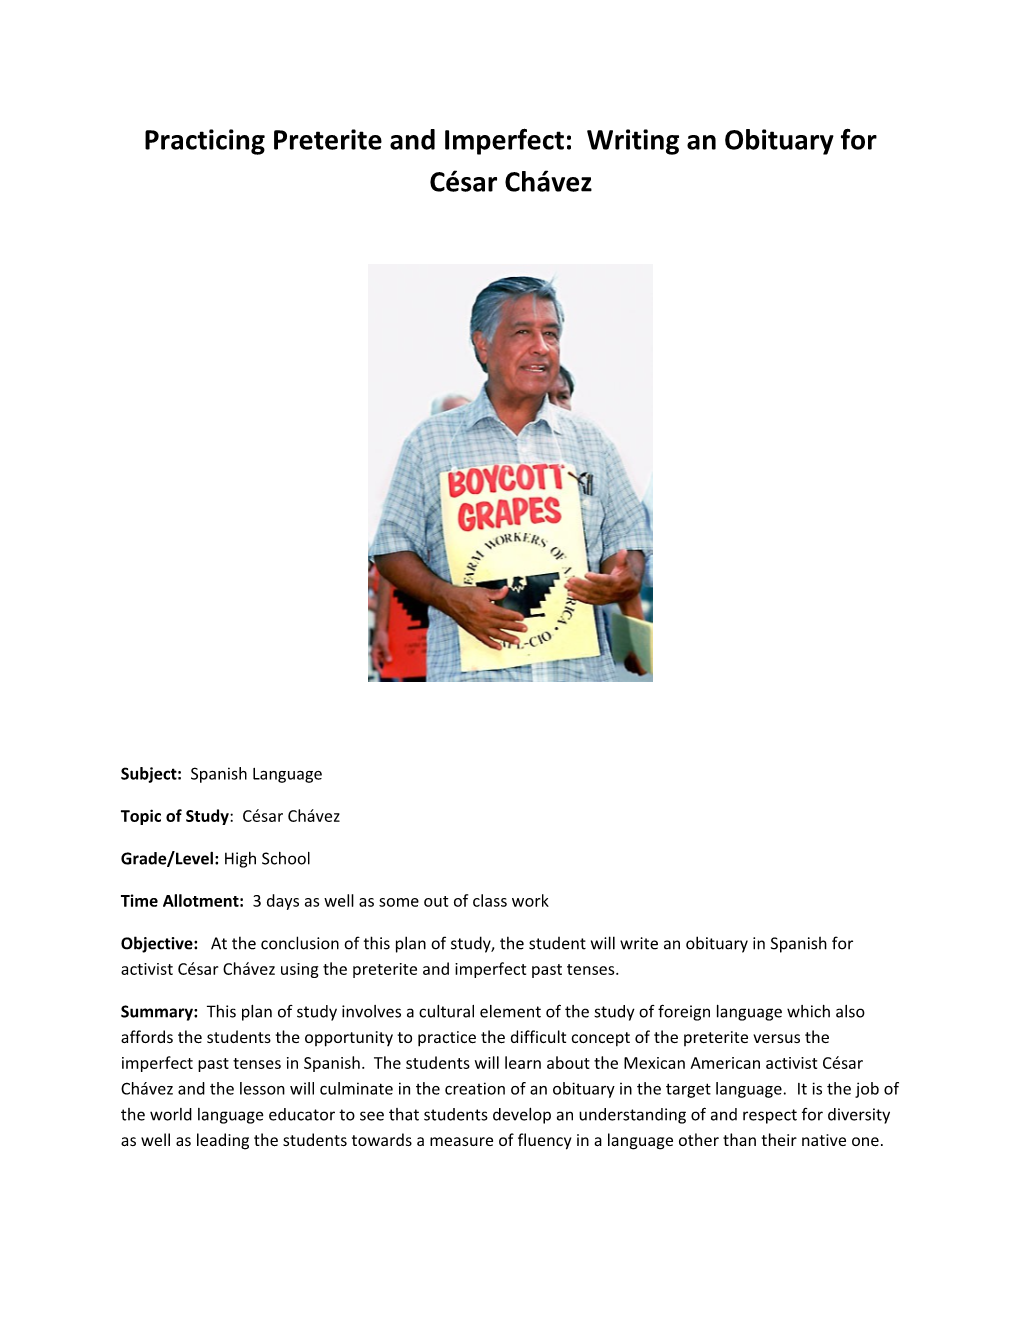 Practicing Preterite and Imperfect: Writing an Obituary for César Chávez